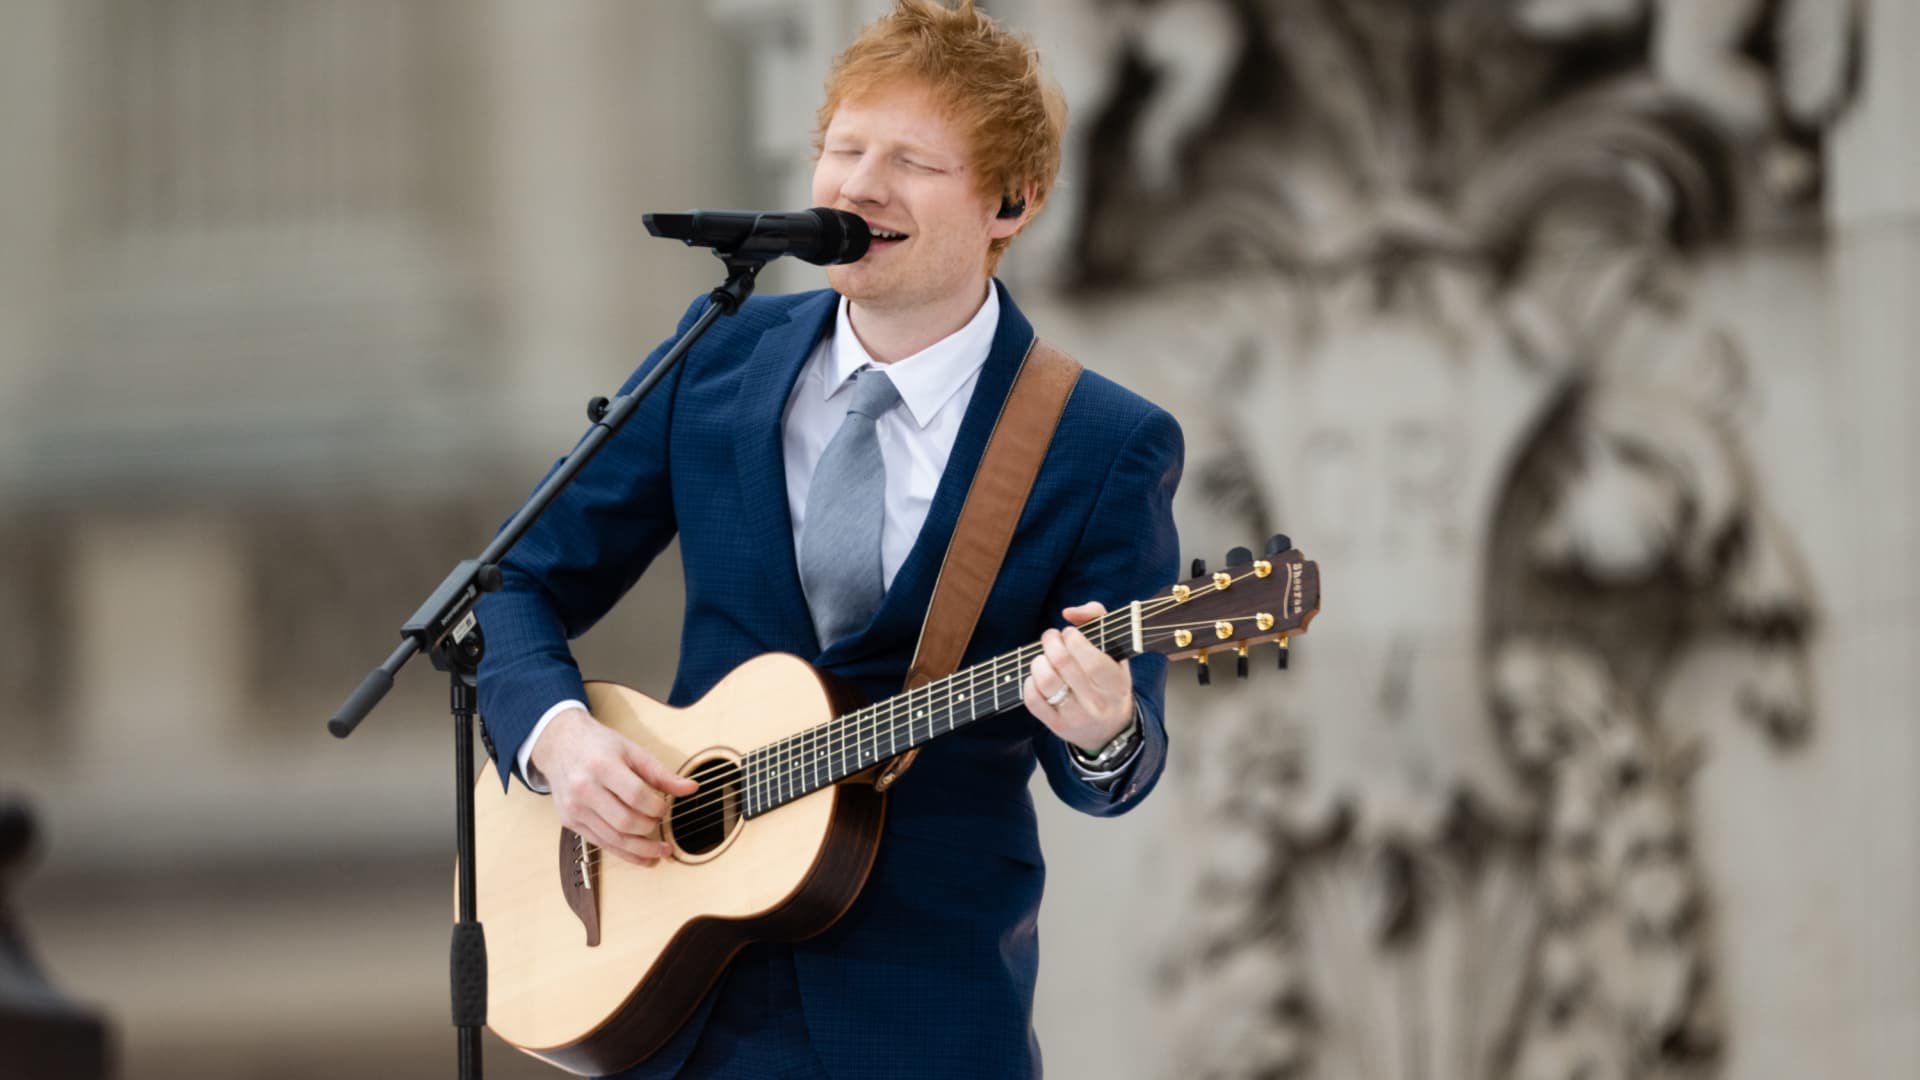 Ed Sheeran was one of a host of legendary British acts to perform on stage at Buckingham Palace during Queen Elizabeth II's Platinum Jubilee Pageant on June 5, 2022, in London.